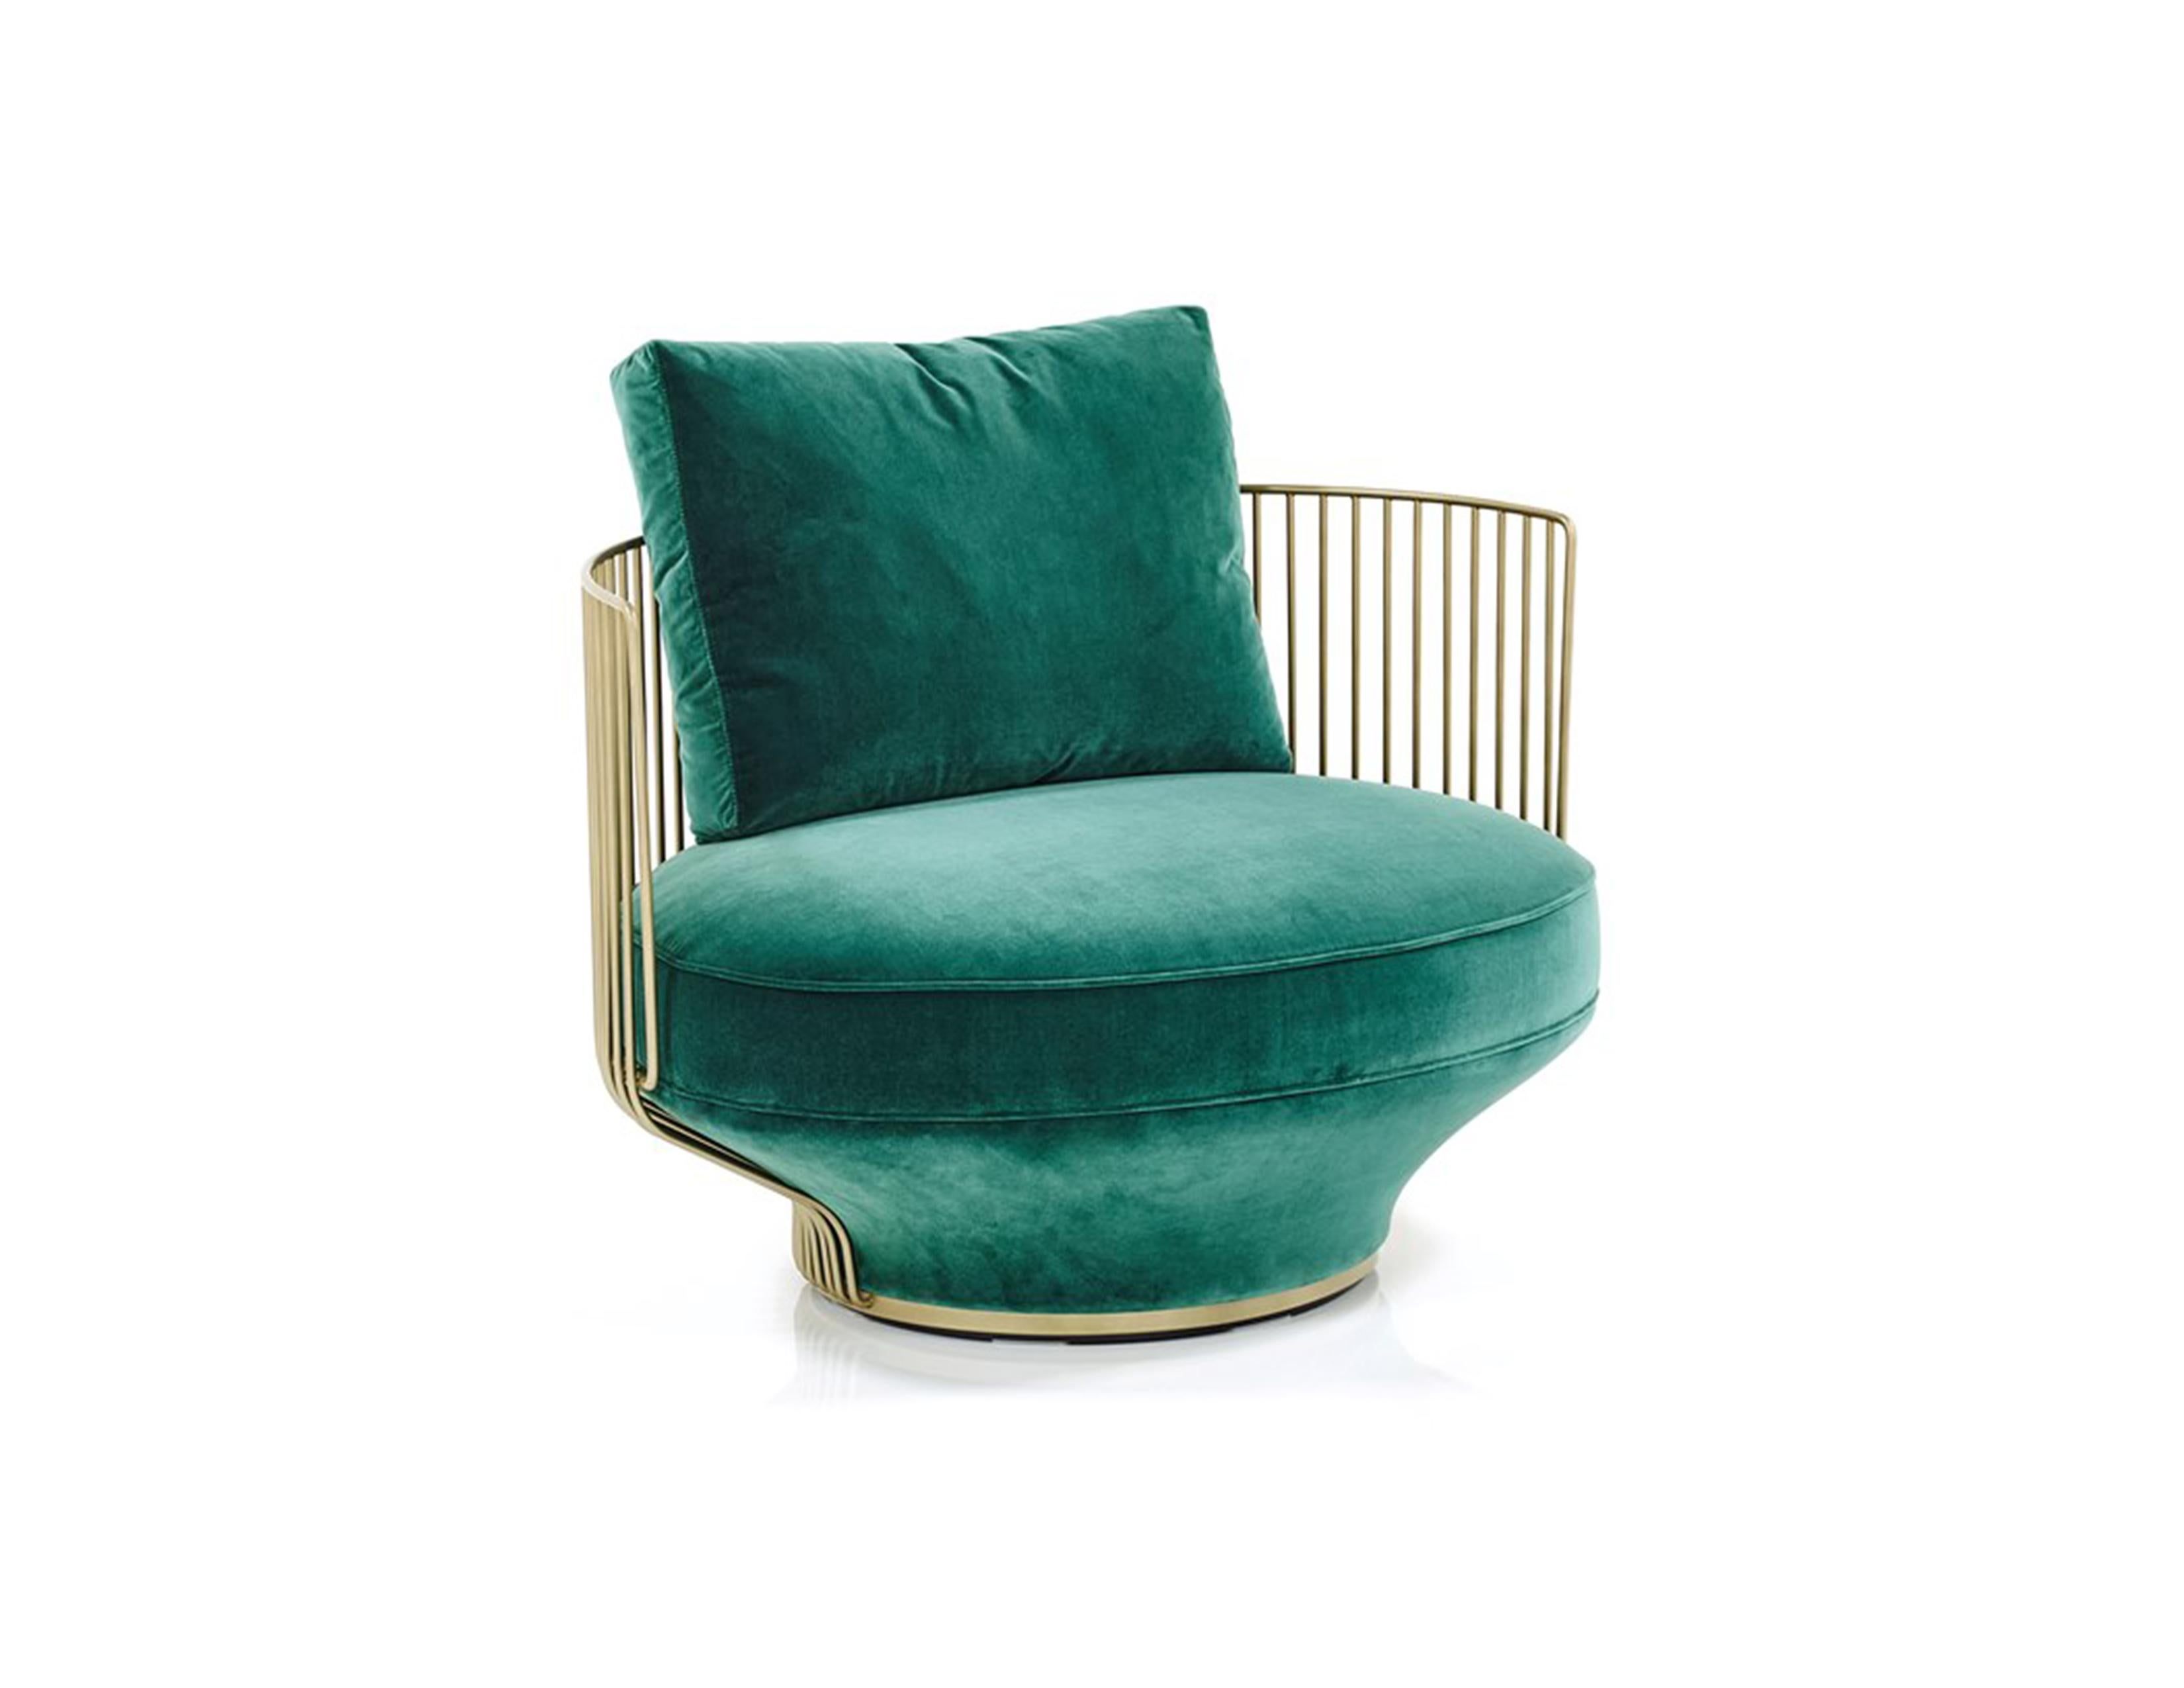 Many different upholstery materials available.
Standard: black grey fine powder coated
On request: brass satin matte finish.
Standard piping.
Paradise Bird is a collection of unusual pieces of furniture: it manifests an attitude to life, an